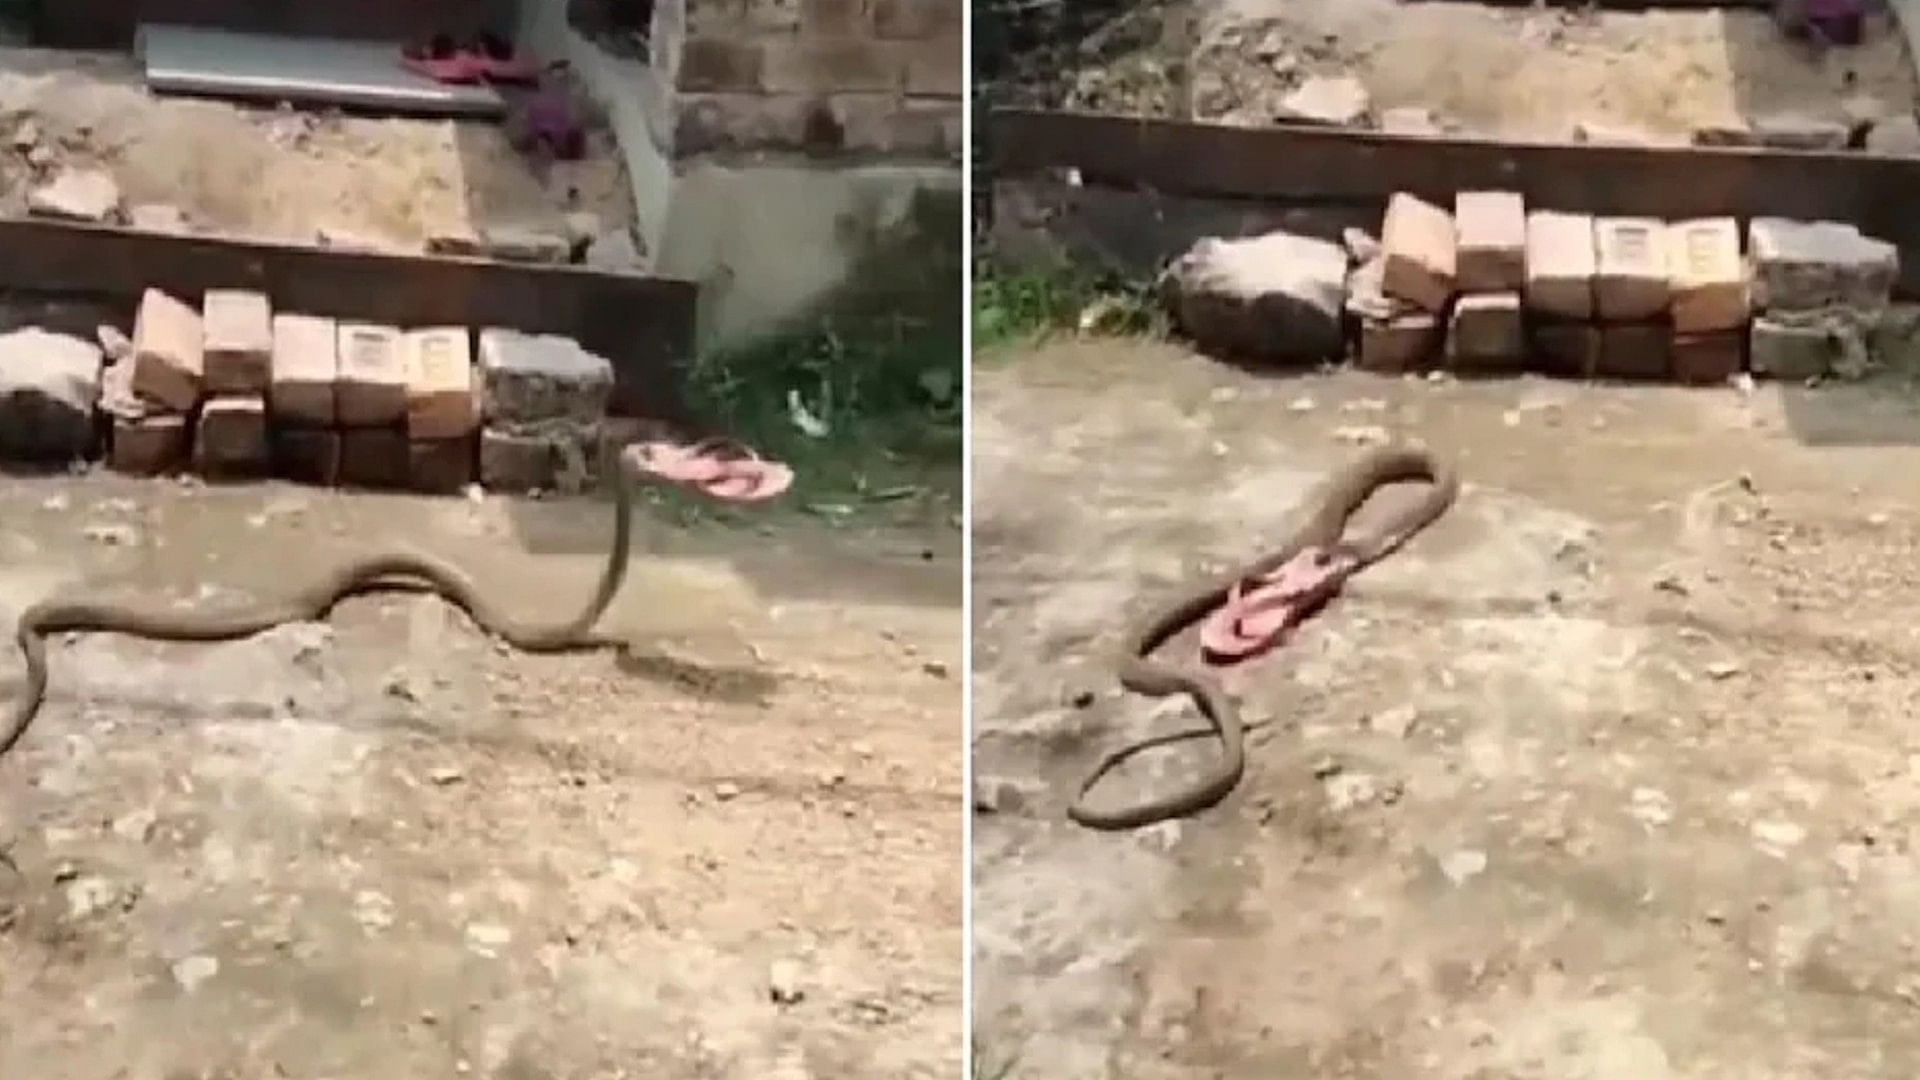 Funny Snake Video Viral On Social Media: Snake ran away with woman's slippers